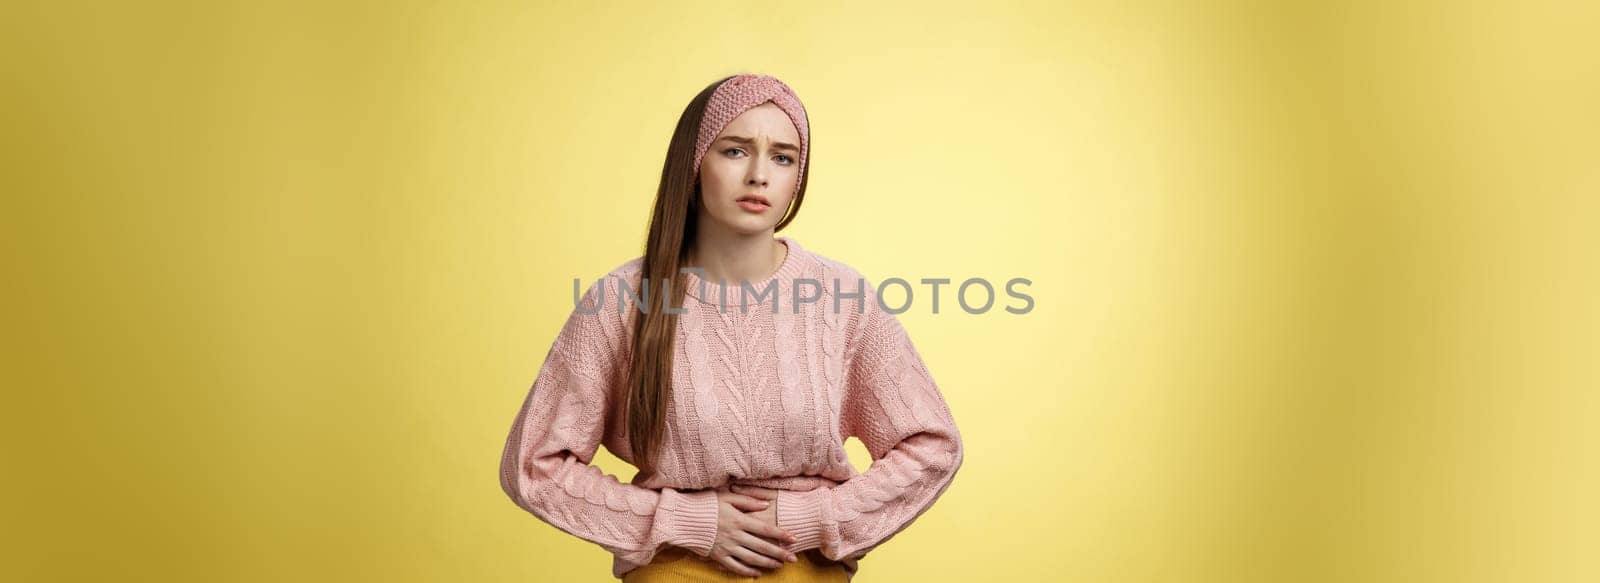 Girl suffering pain in stomach, having painful periods, feeling unwell touching belly grimacing displeased and troubled, having cramps, stooping upset of stomachahe against yellow background.